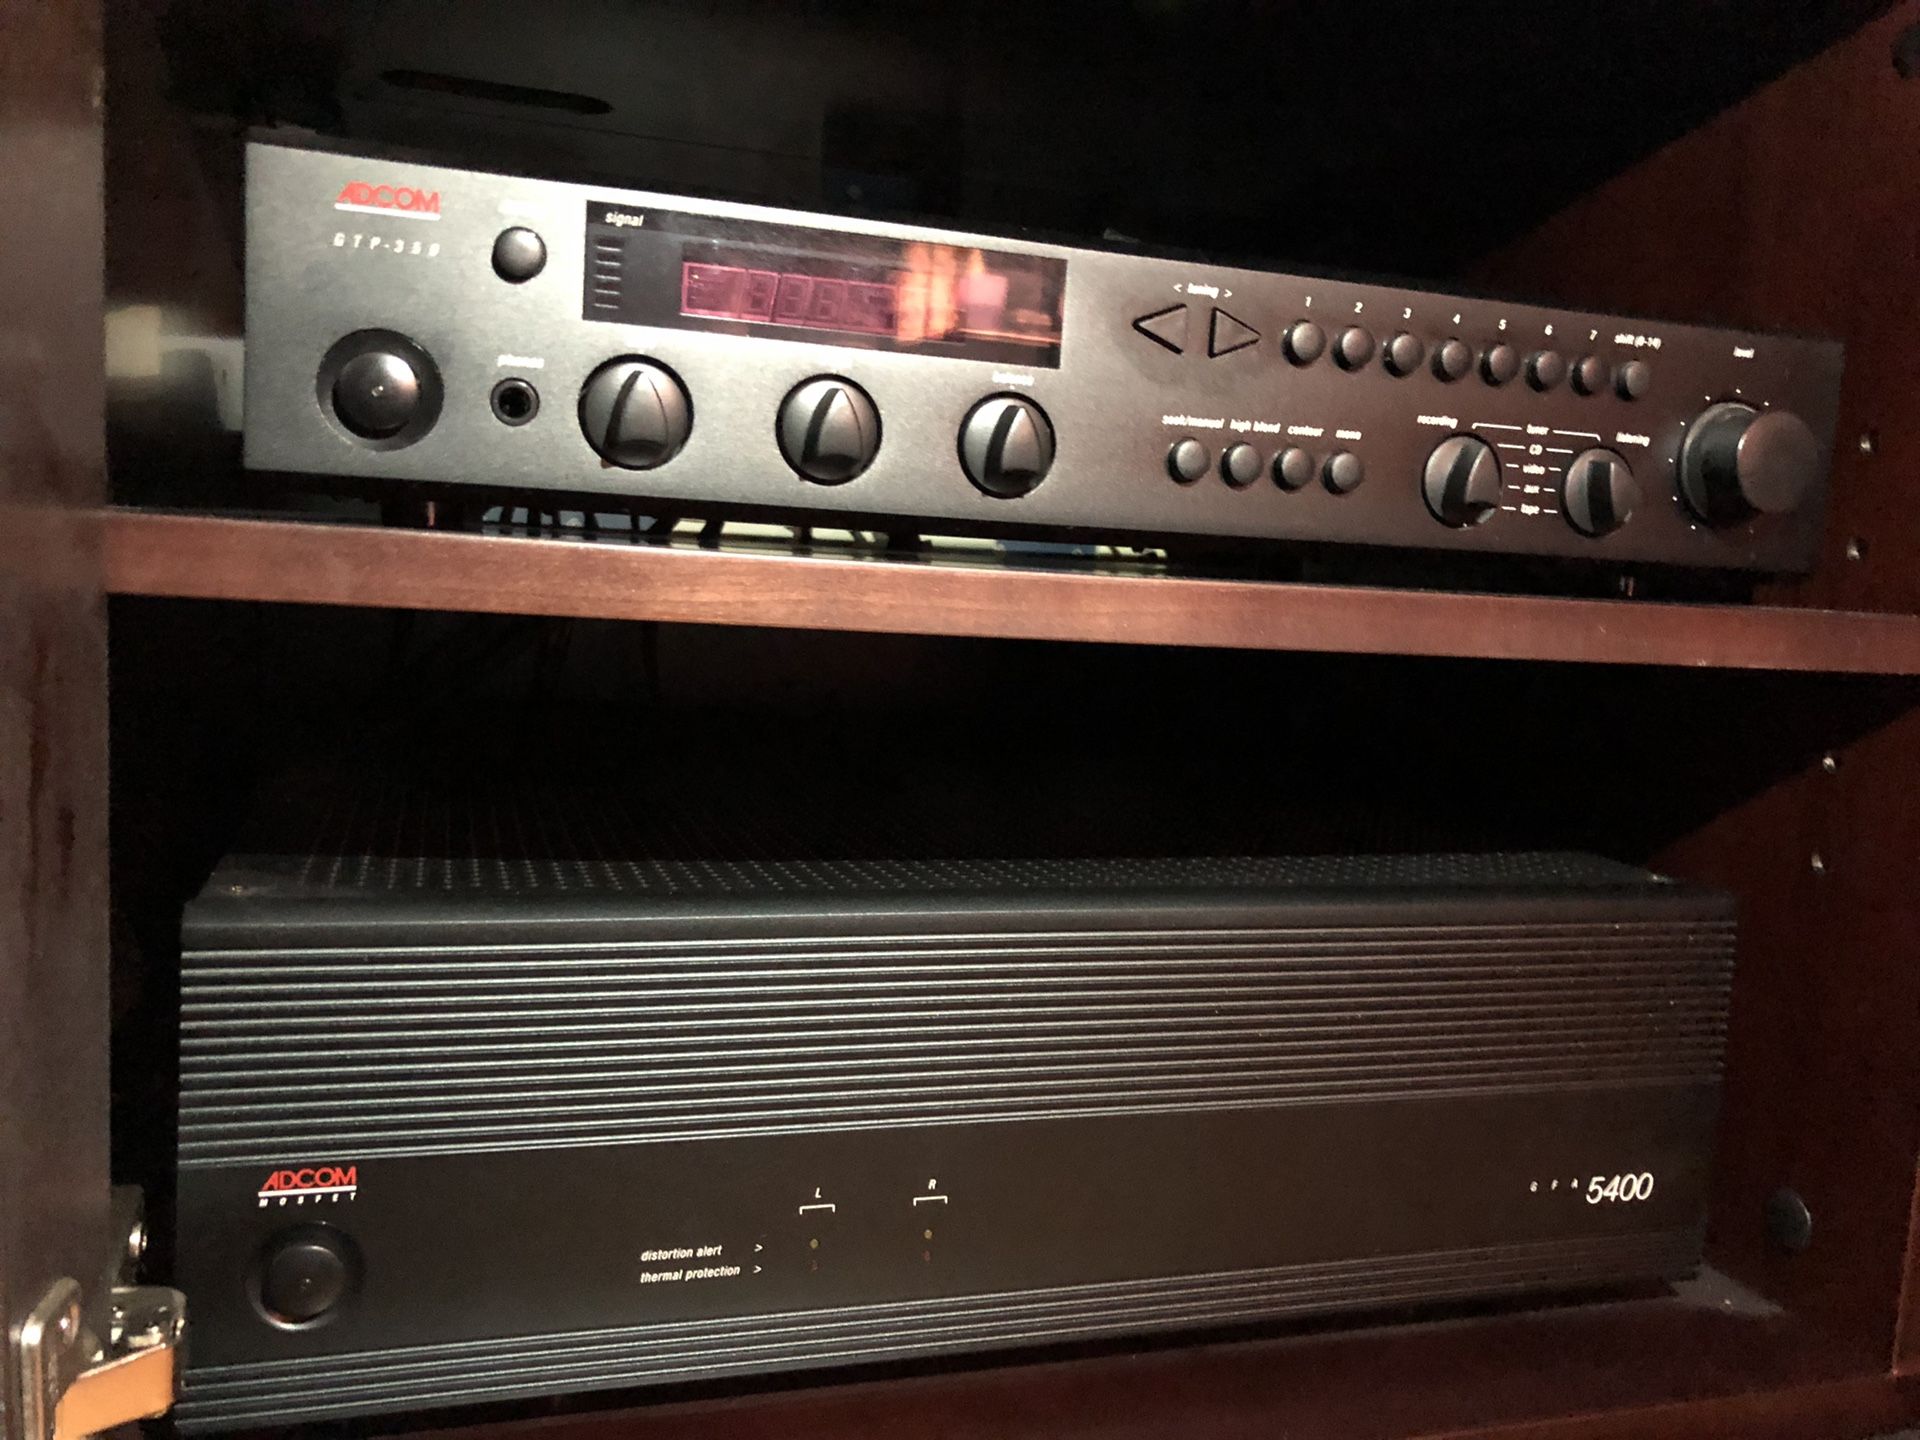 Adcom GFA 5400 amp and GTP 350 tuner pre-amp stereo components